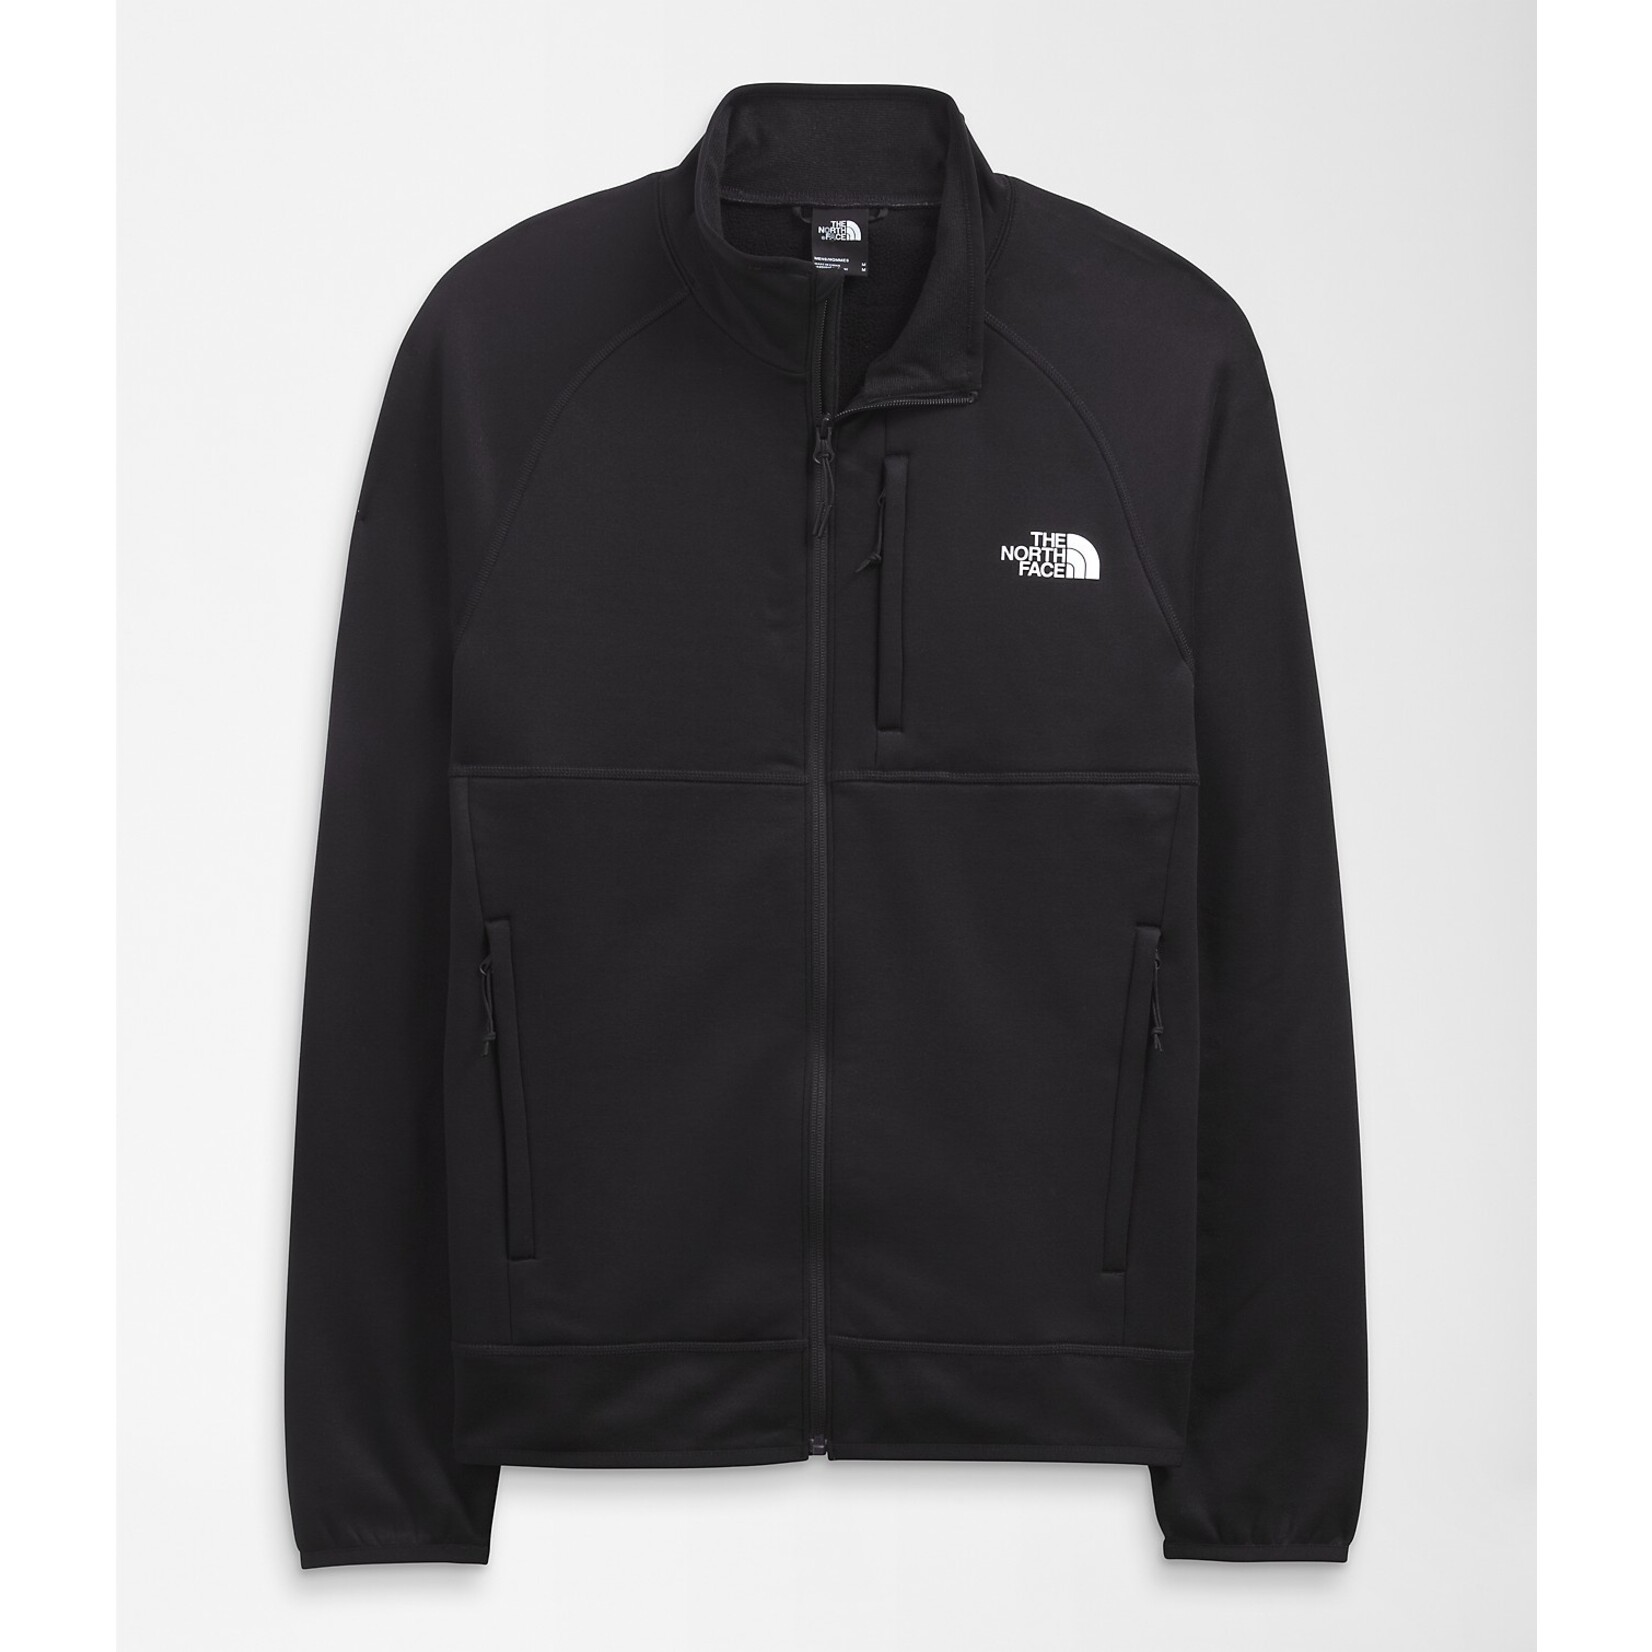 Men's Canyonlands Full-Zip Jacket The North Face, 53% OFF